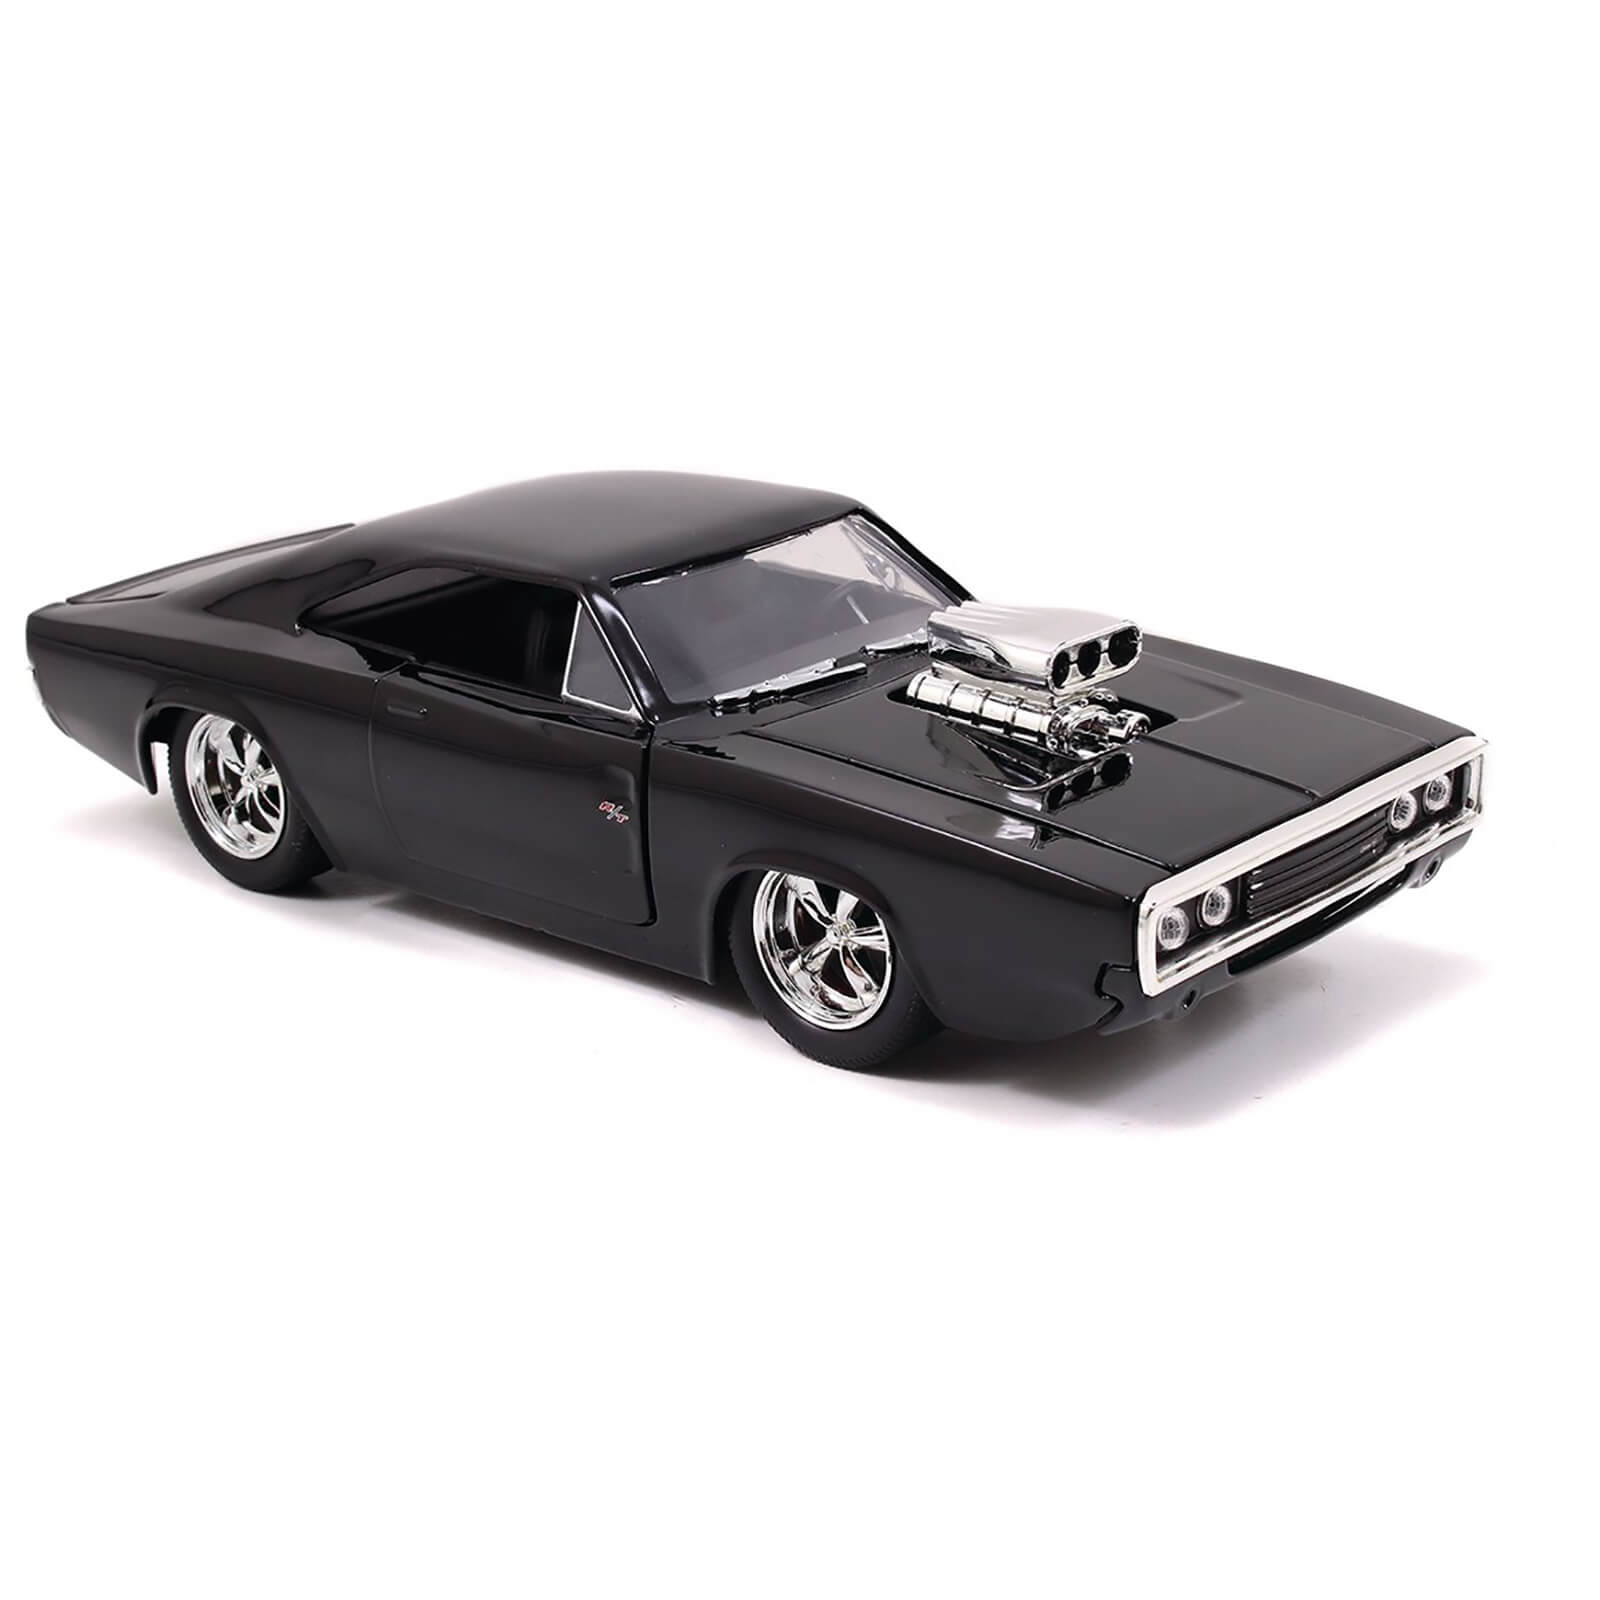 Jada Toys Fast & Furious RC 1970 Dodge Charger 1:24